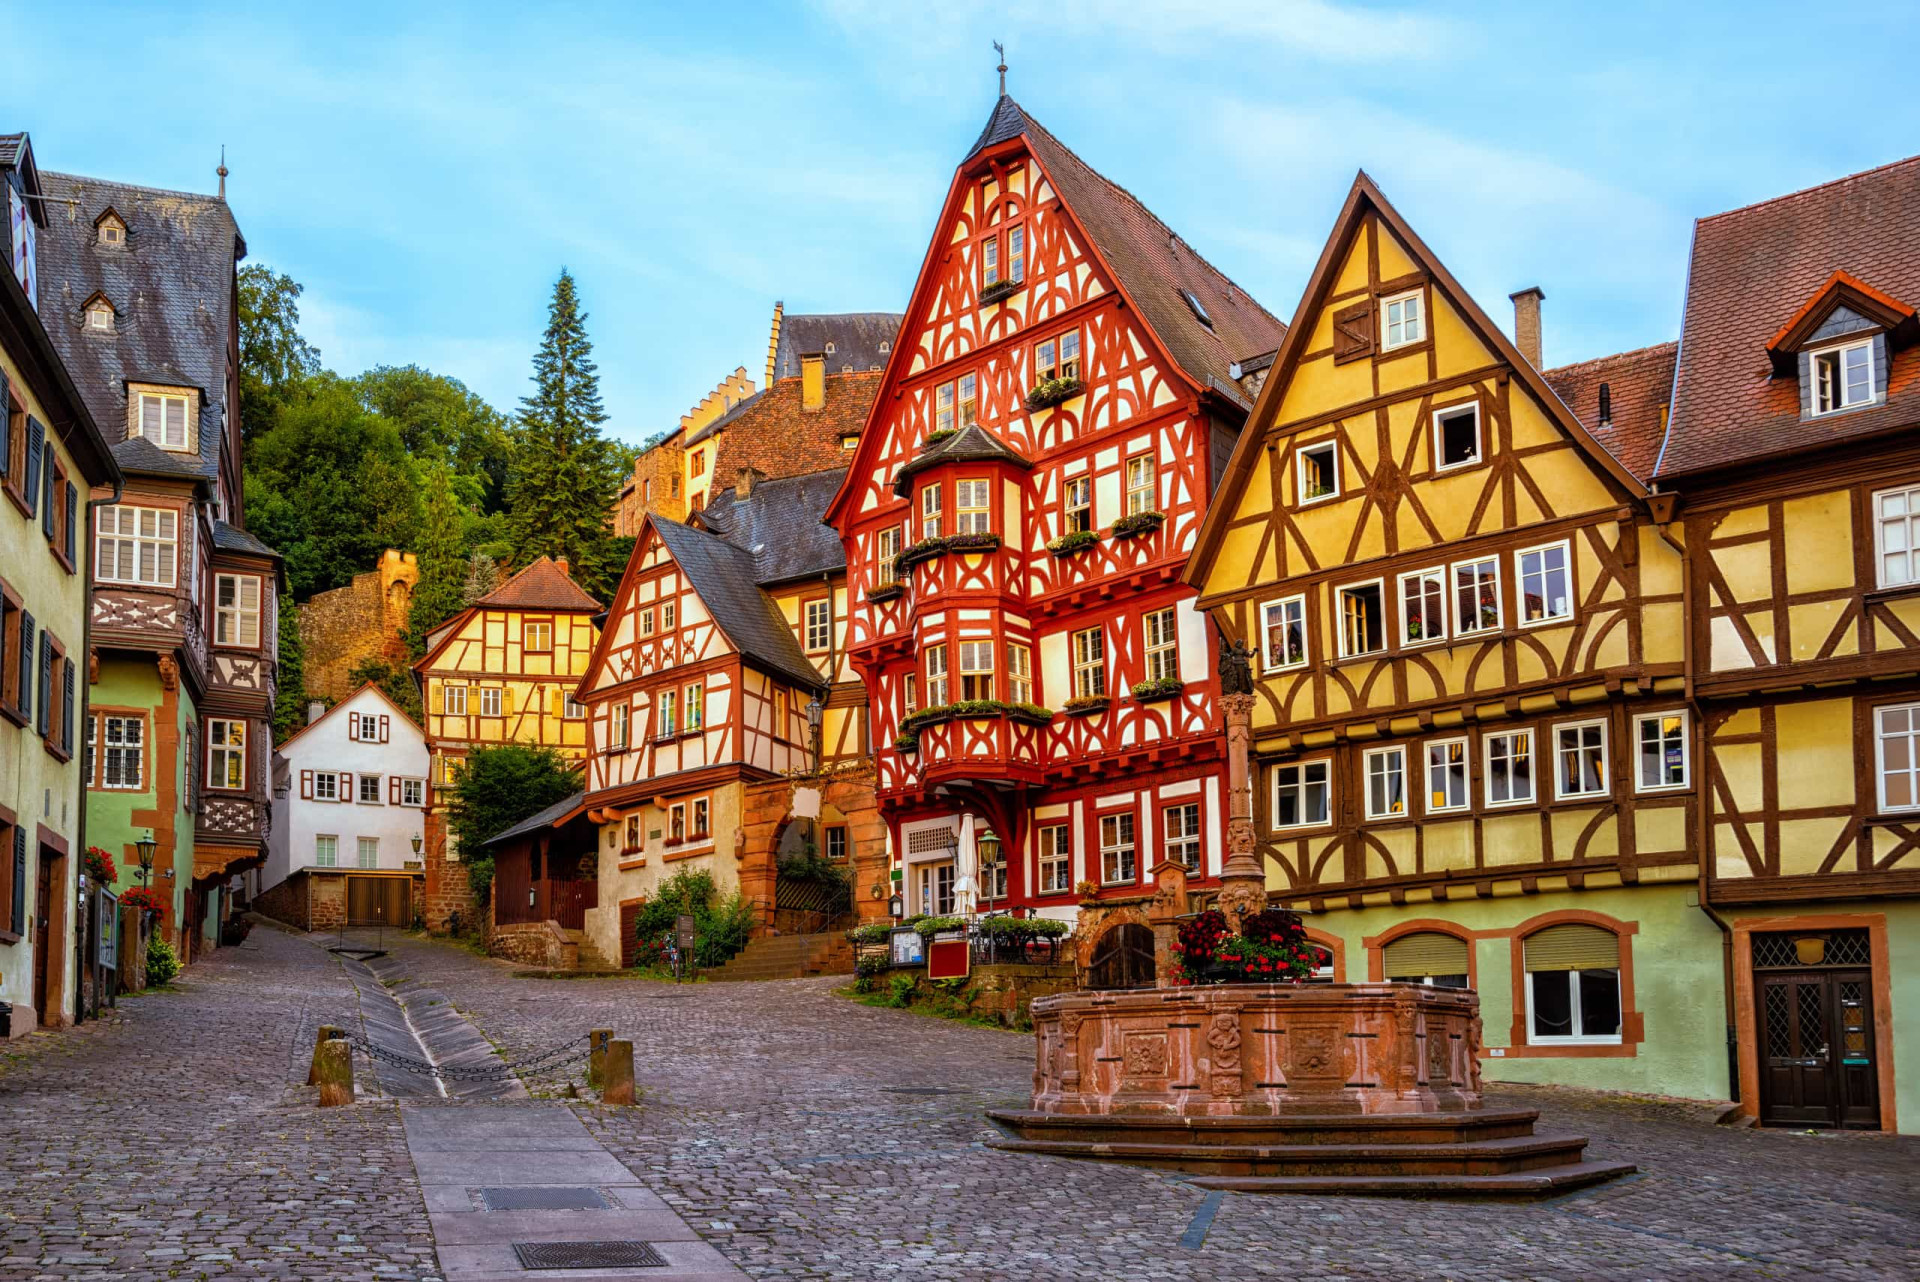 <p>Miltenberg in Bavaria's Lower Franconia district lures visitors to its timbered old town, an eye-catching ensemble of medieval townhouses set over cobblestoned lanes and squares.</p><p><a href="https://www.msn.com/en-us/community/channel/vid-7xx8mnucu55yw63we9va2gwr7uihbxwc68fxqp25x6tg4ftibpra?cvid=94631541bc0f4f89bfd59158d696ad7e">Follow us and access great exclusive content every day</a></p>